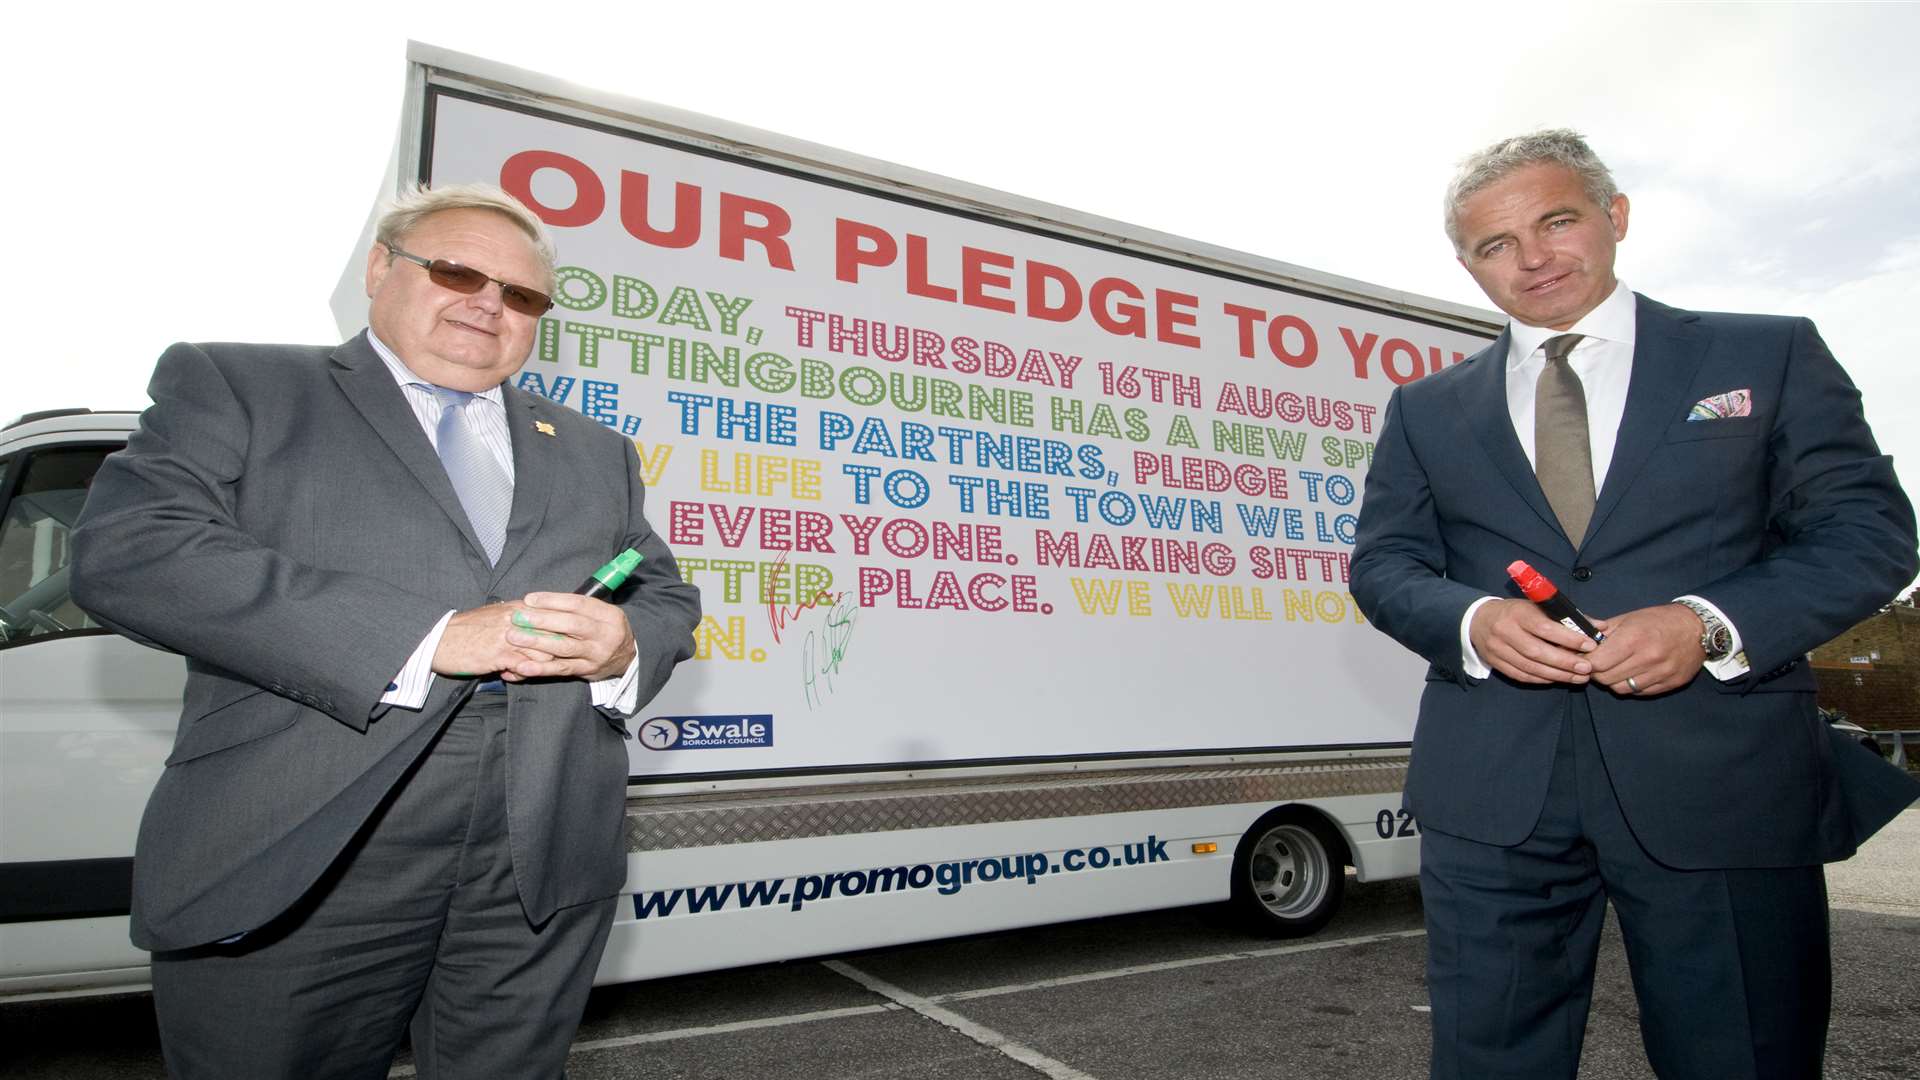 Andrew Bowles and Richard Upton following the Spirit of Sittingbourne founding agreement in 2012